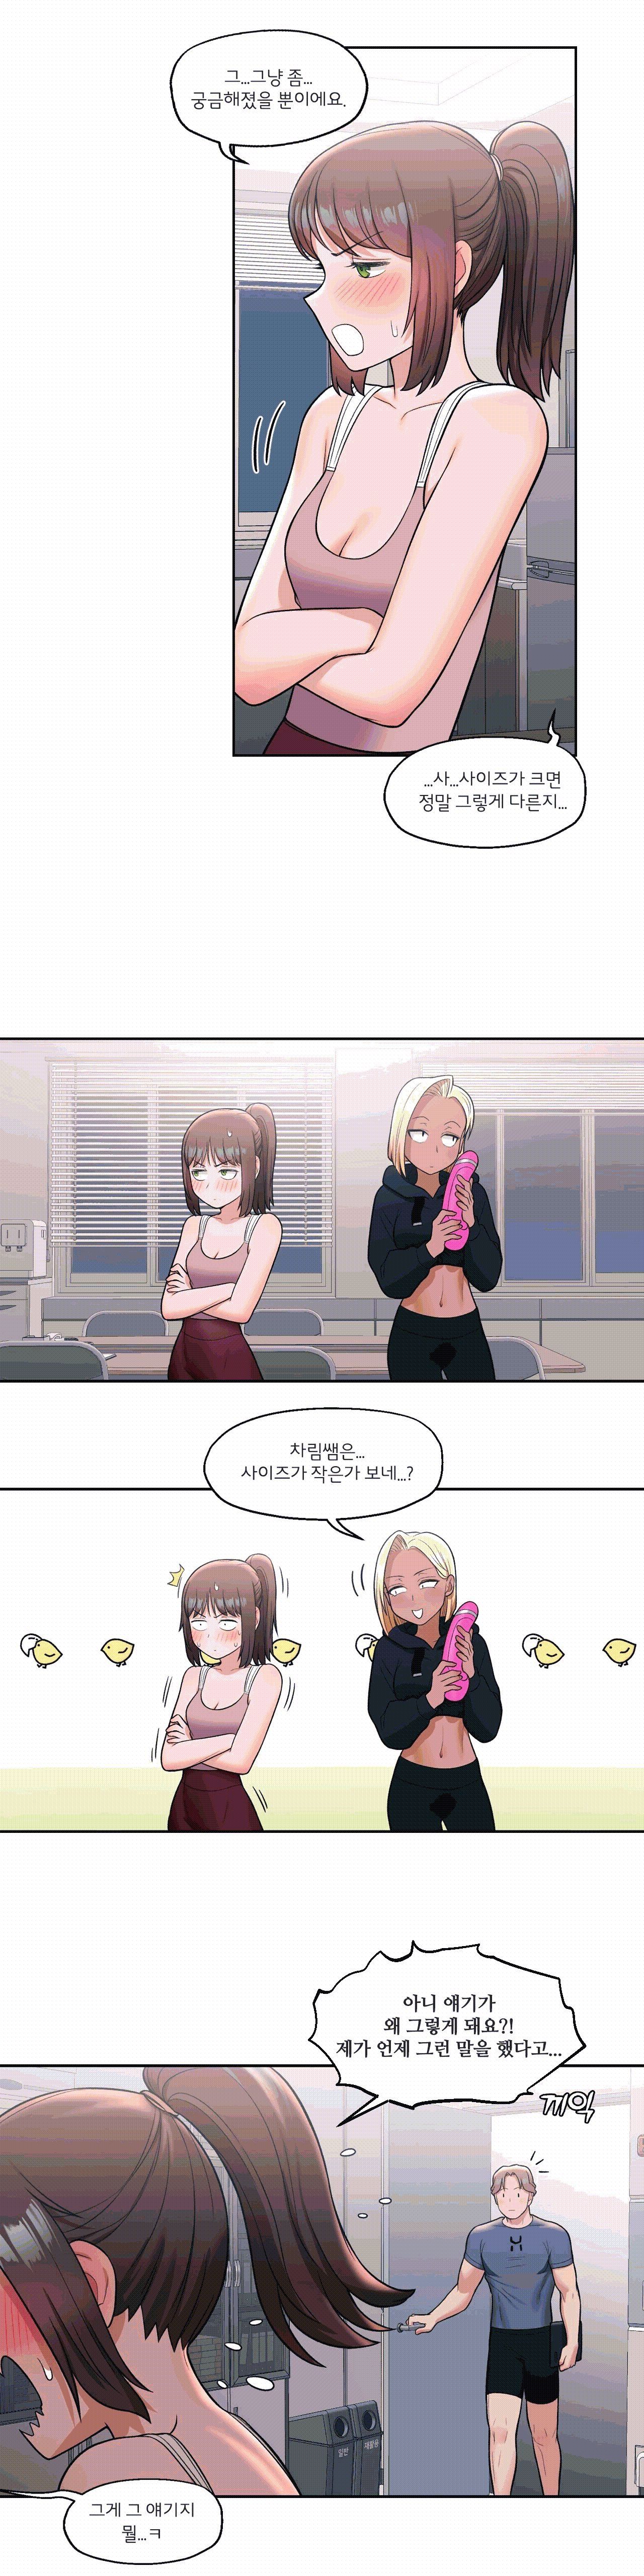 Sexercise Raw - Chapter 30 Page 8